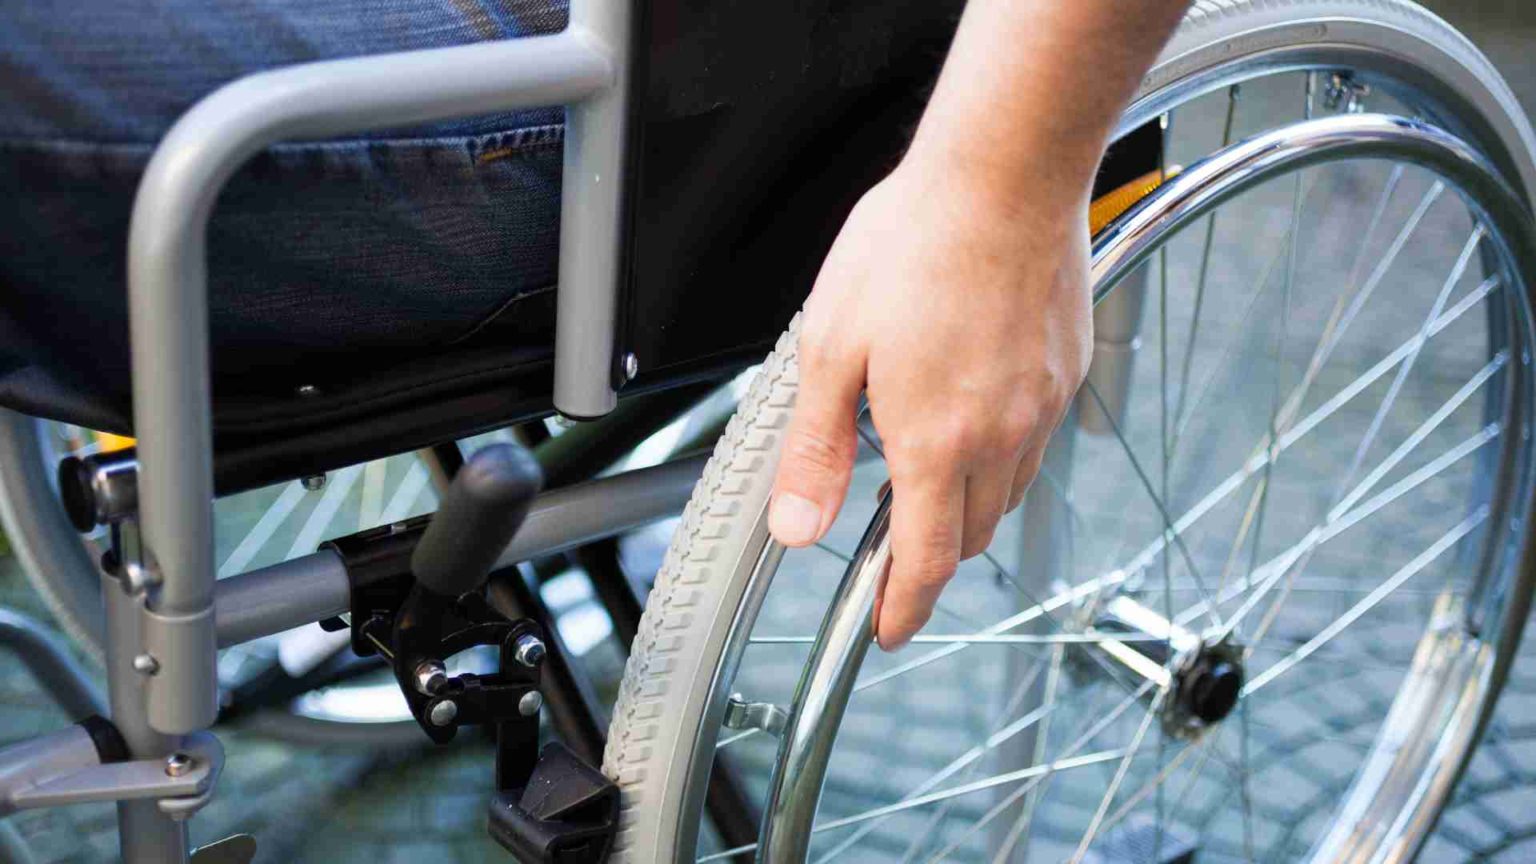 Disability benefits Who can receive 2,720 on SSDI payments in January?